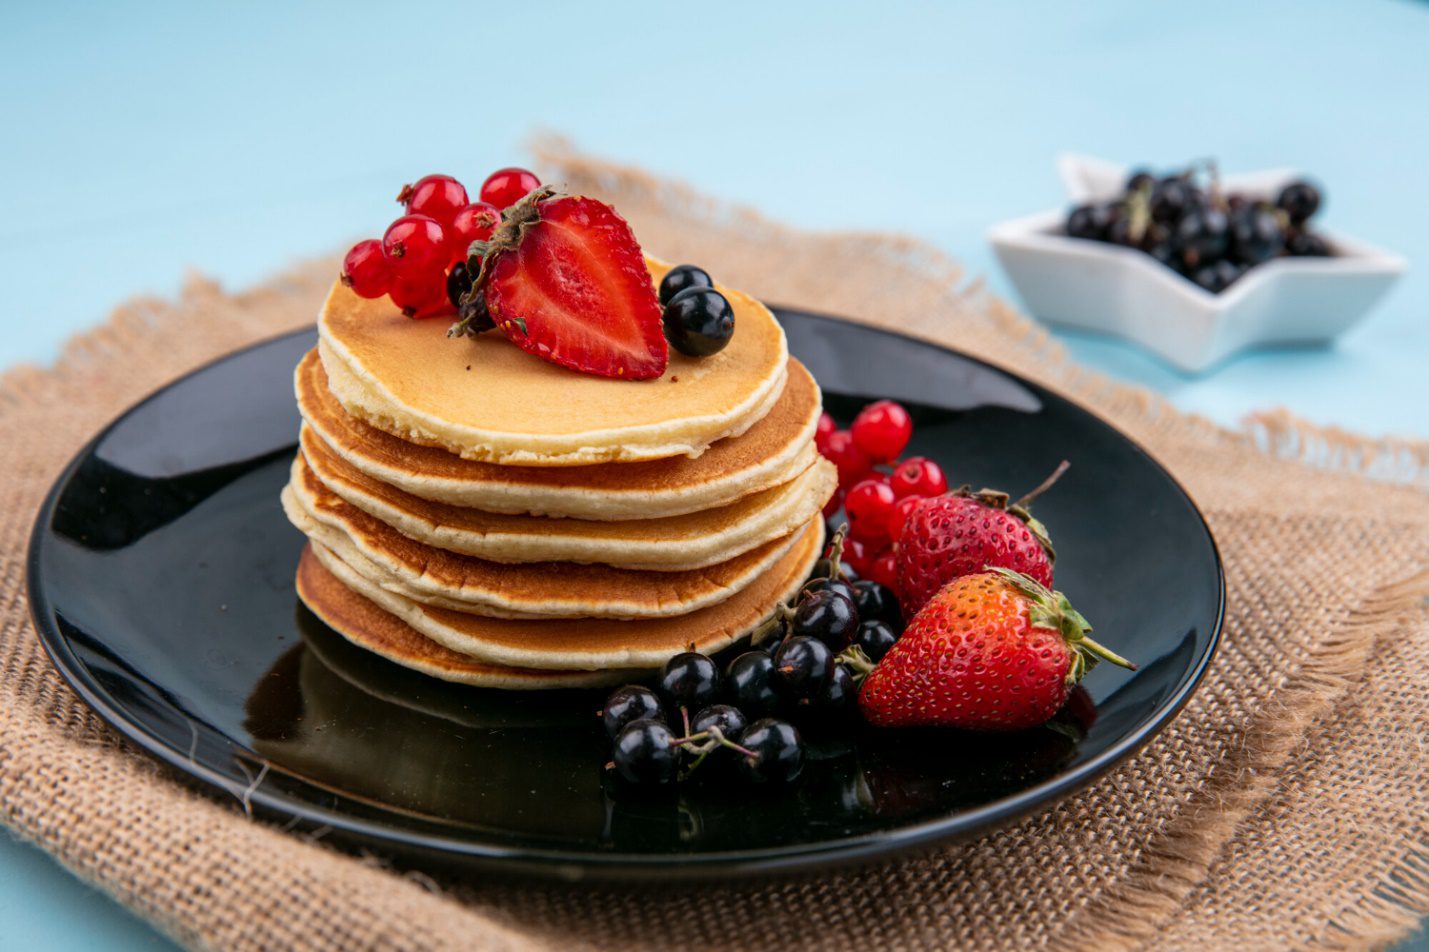 C:\Users\Talha\Downloads\front-view-pancakes-with-red-black-currants-strawberries-black-plate-beige-napkin.jpg